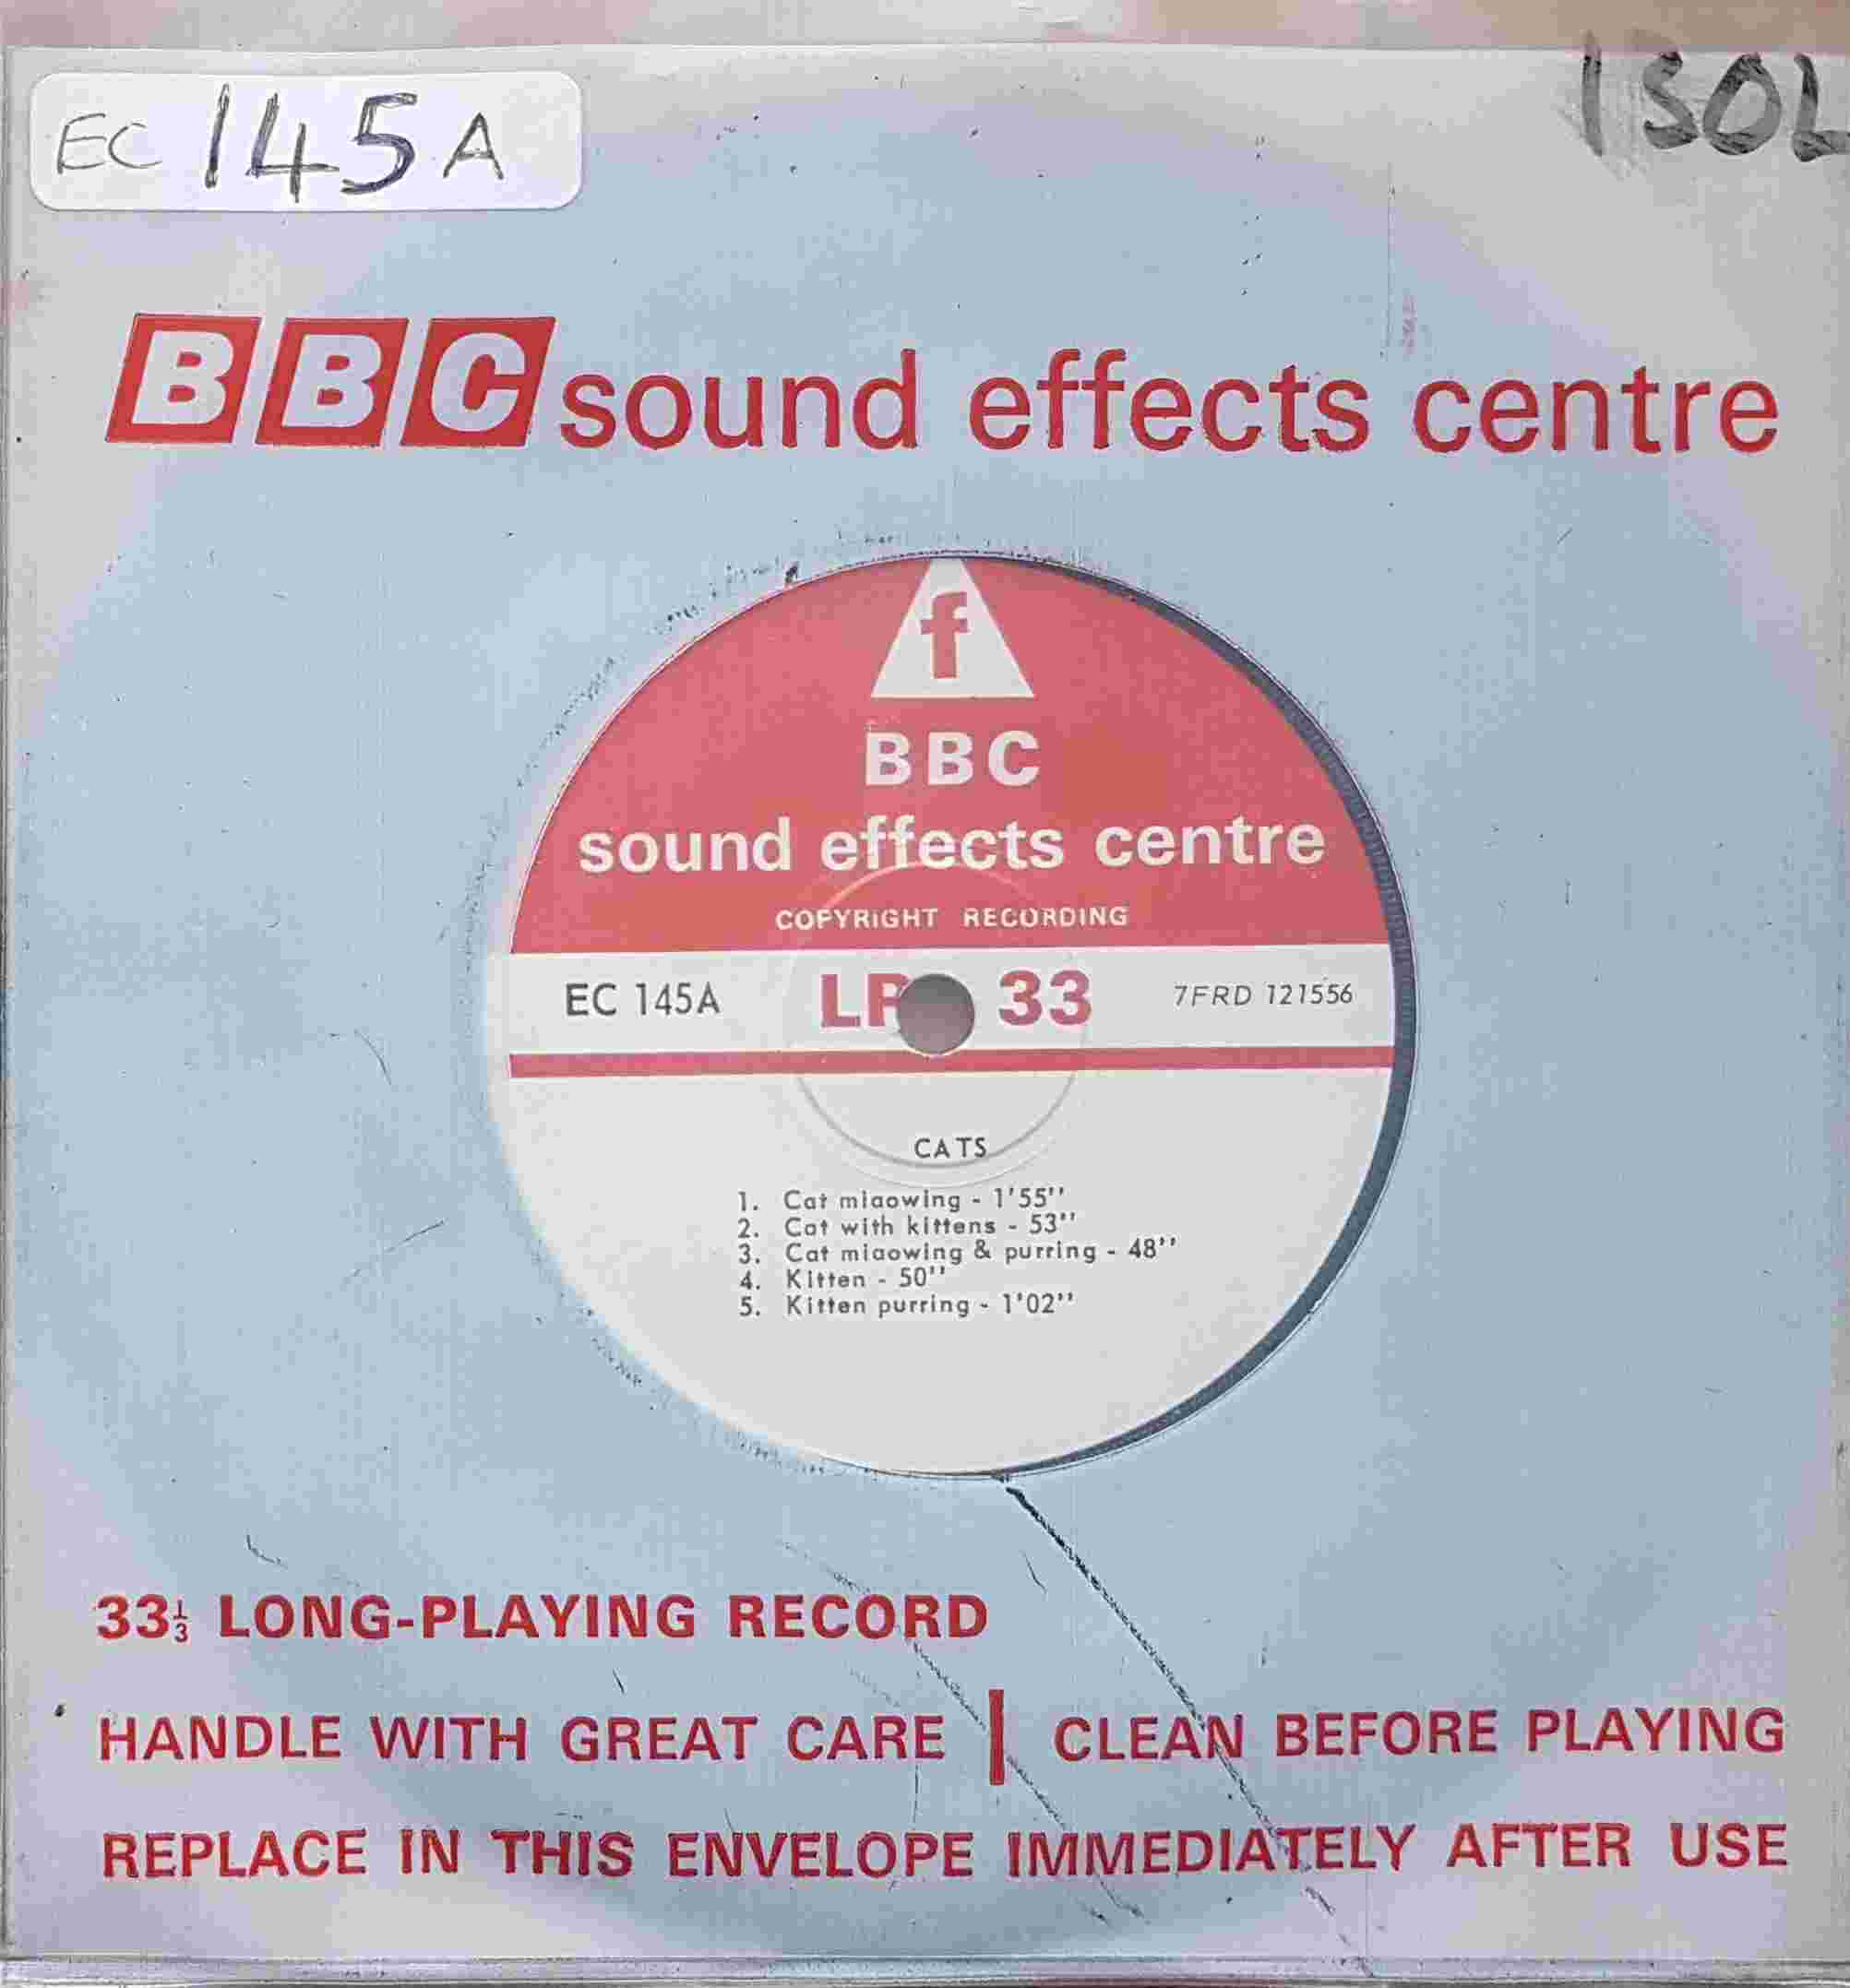 Picture of EC 145A Cats by artist Not registered from the BBC records and Tapes library